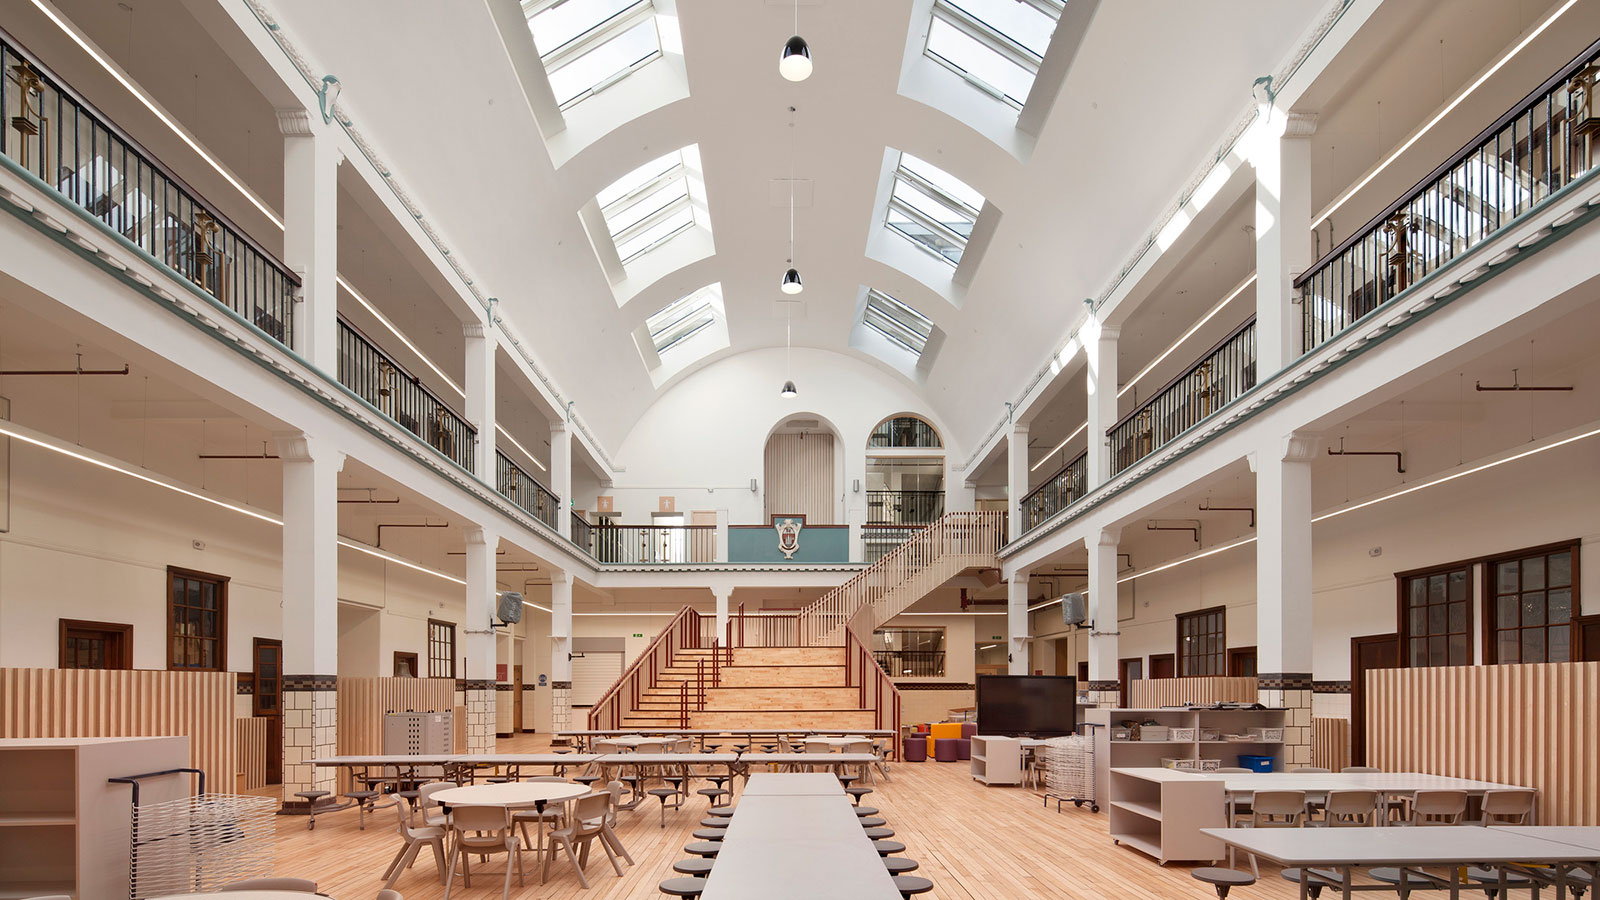 The interior of a two-storey atrium in a school. The ground floor of the atrium is a cafeteria and the first floor leads to the classrooms.